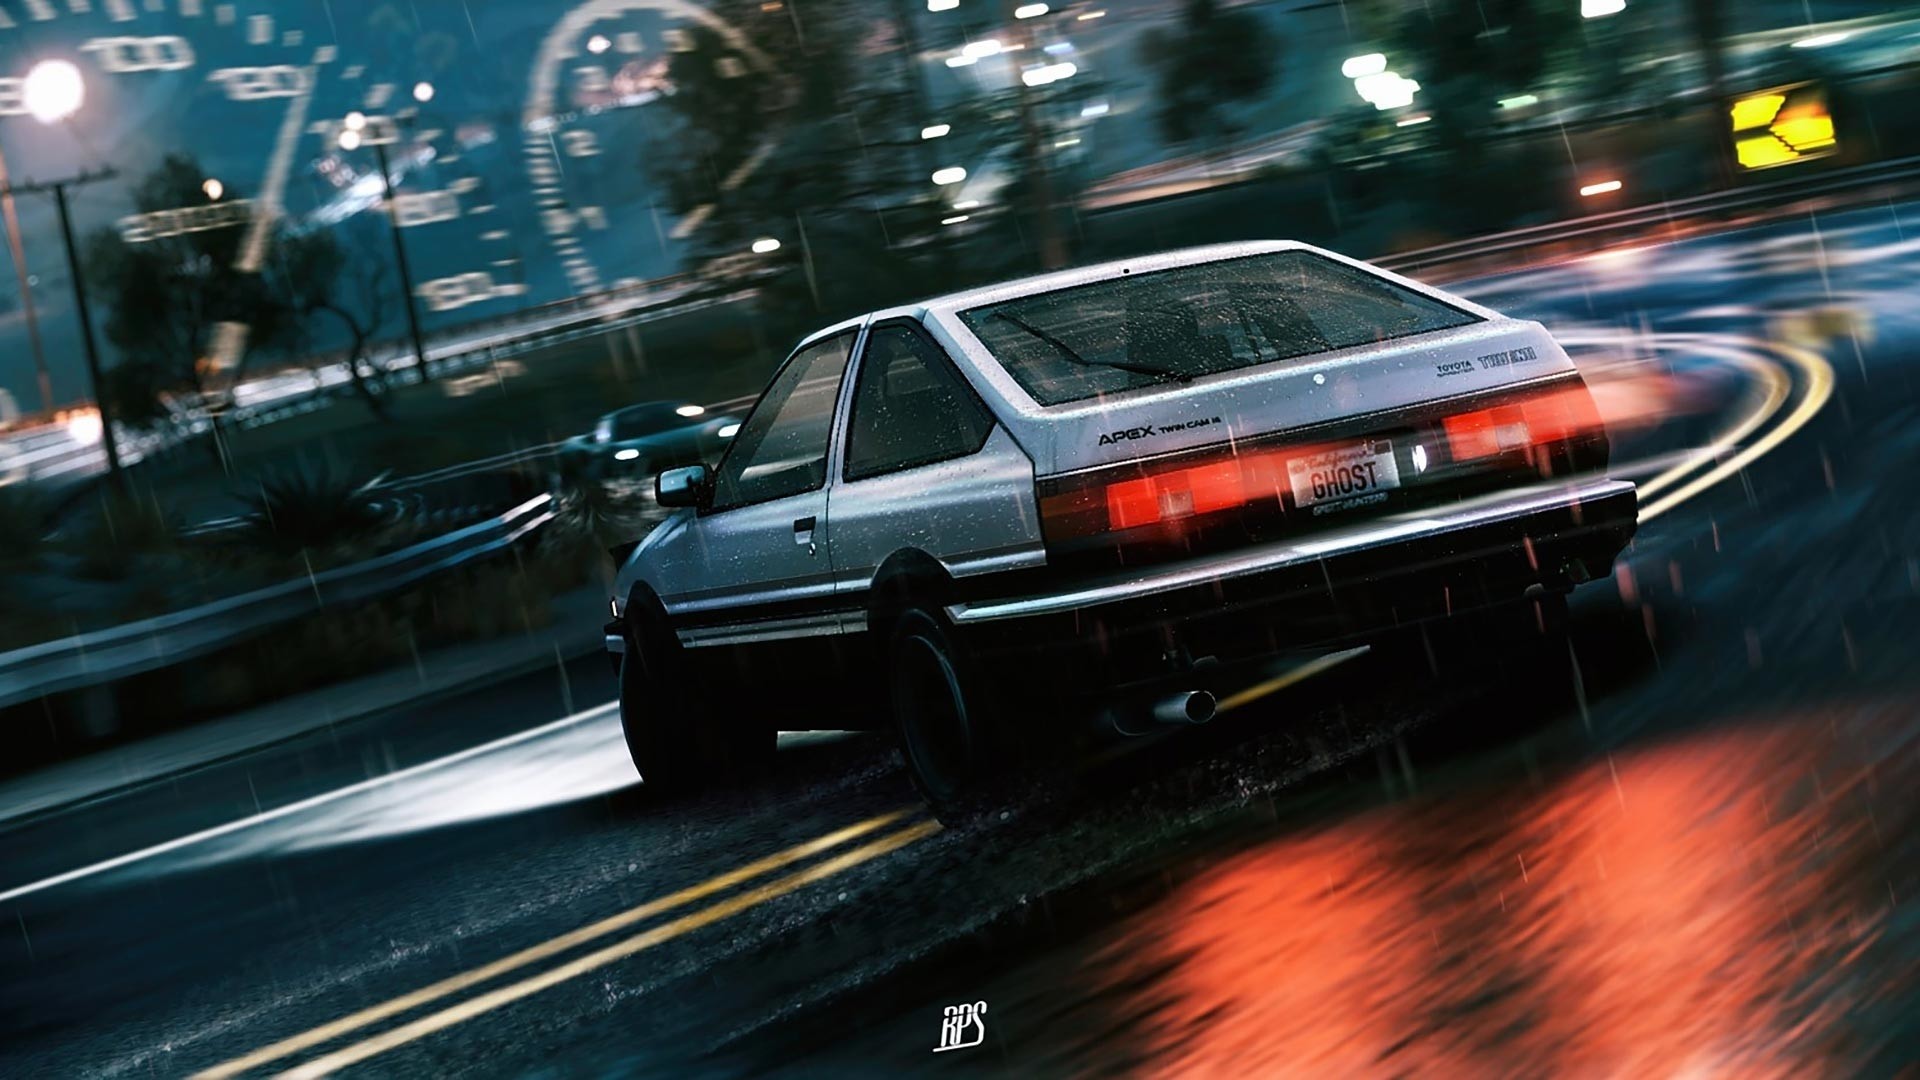 1920x1080 10 New Initial D Wallpaper 1920X1080 FULL HD 1080p For PC Background